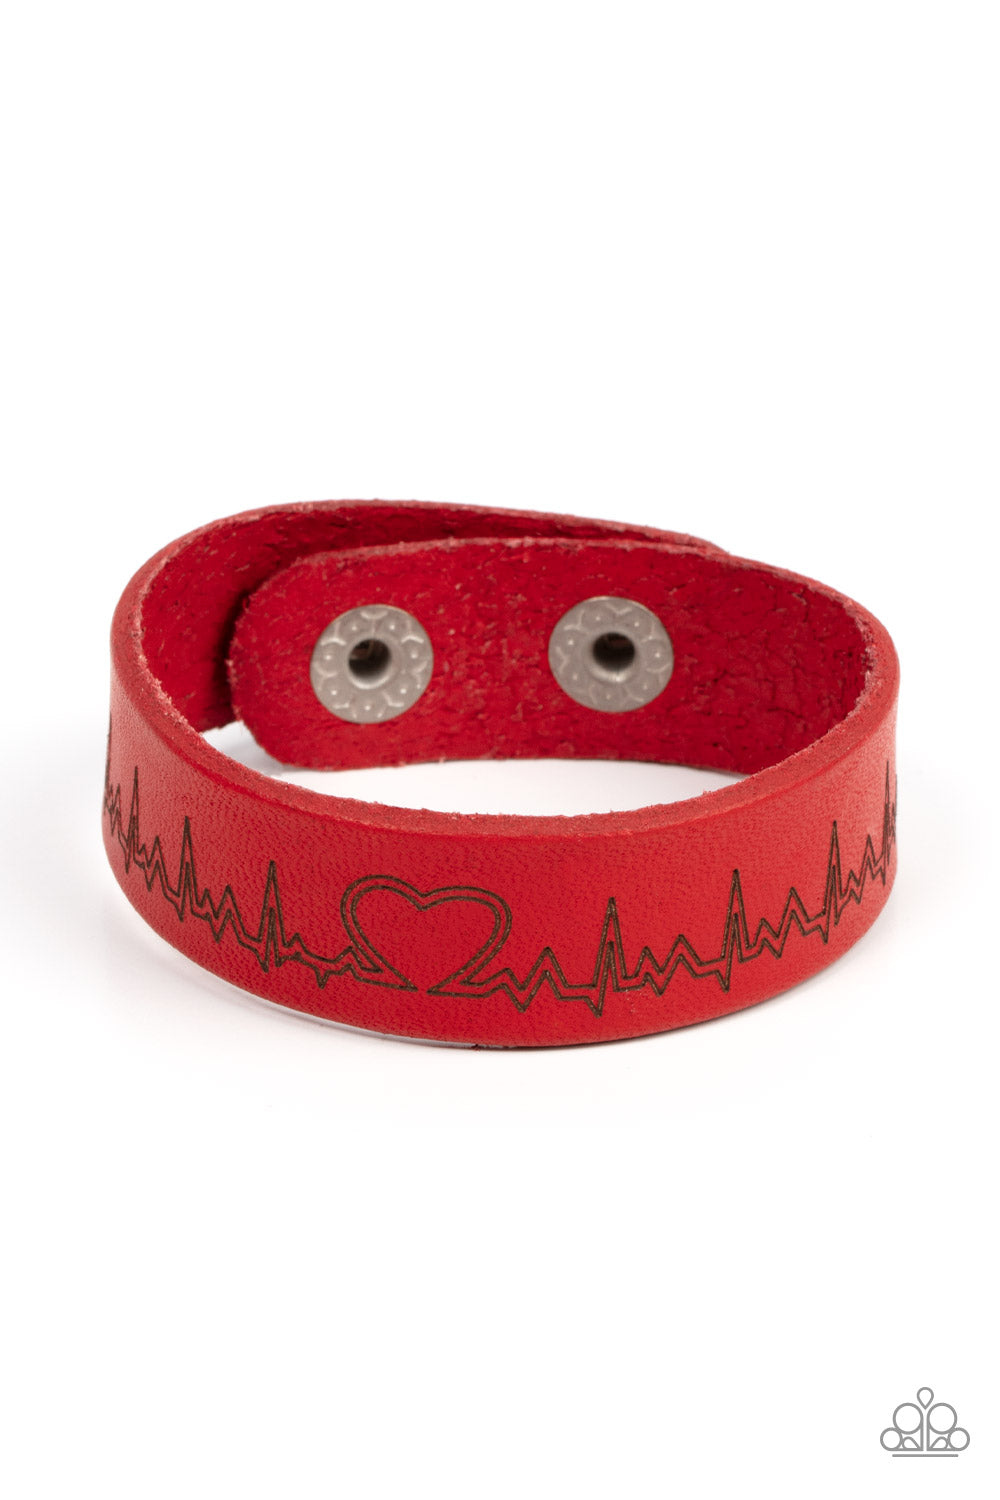 Haute Heartbeat - Red Heartbeat Wrap Bracelets culminating into a heart at the center, a zigzagging pattern reminiscent of a heartbeat is etched across the front of a red leather band around the wrist for a whimsical fashion. Features an adjustable snap closure.  Sold as one individual bracelet.